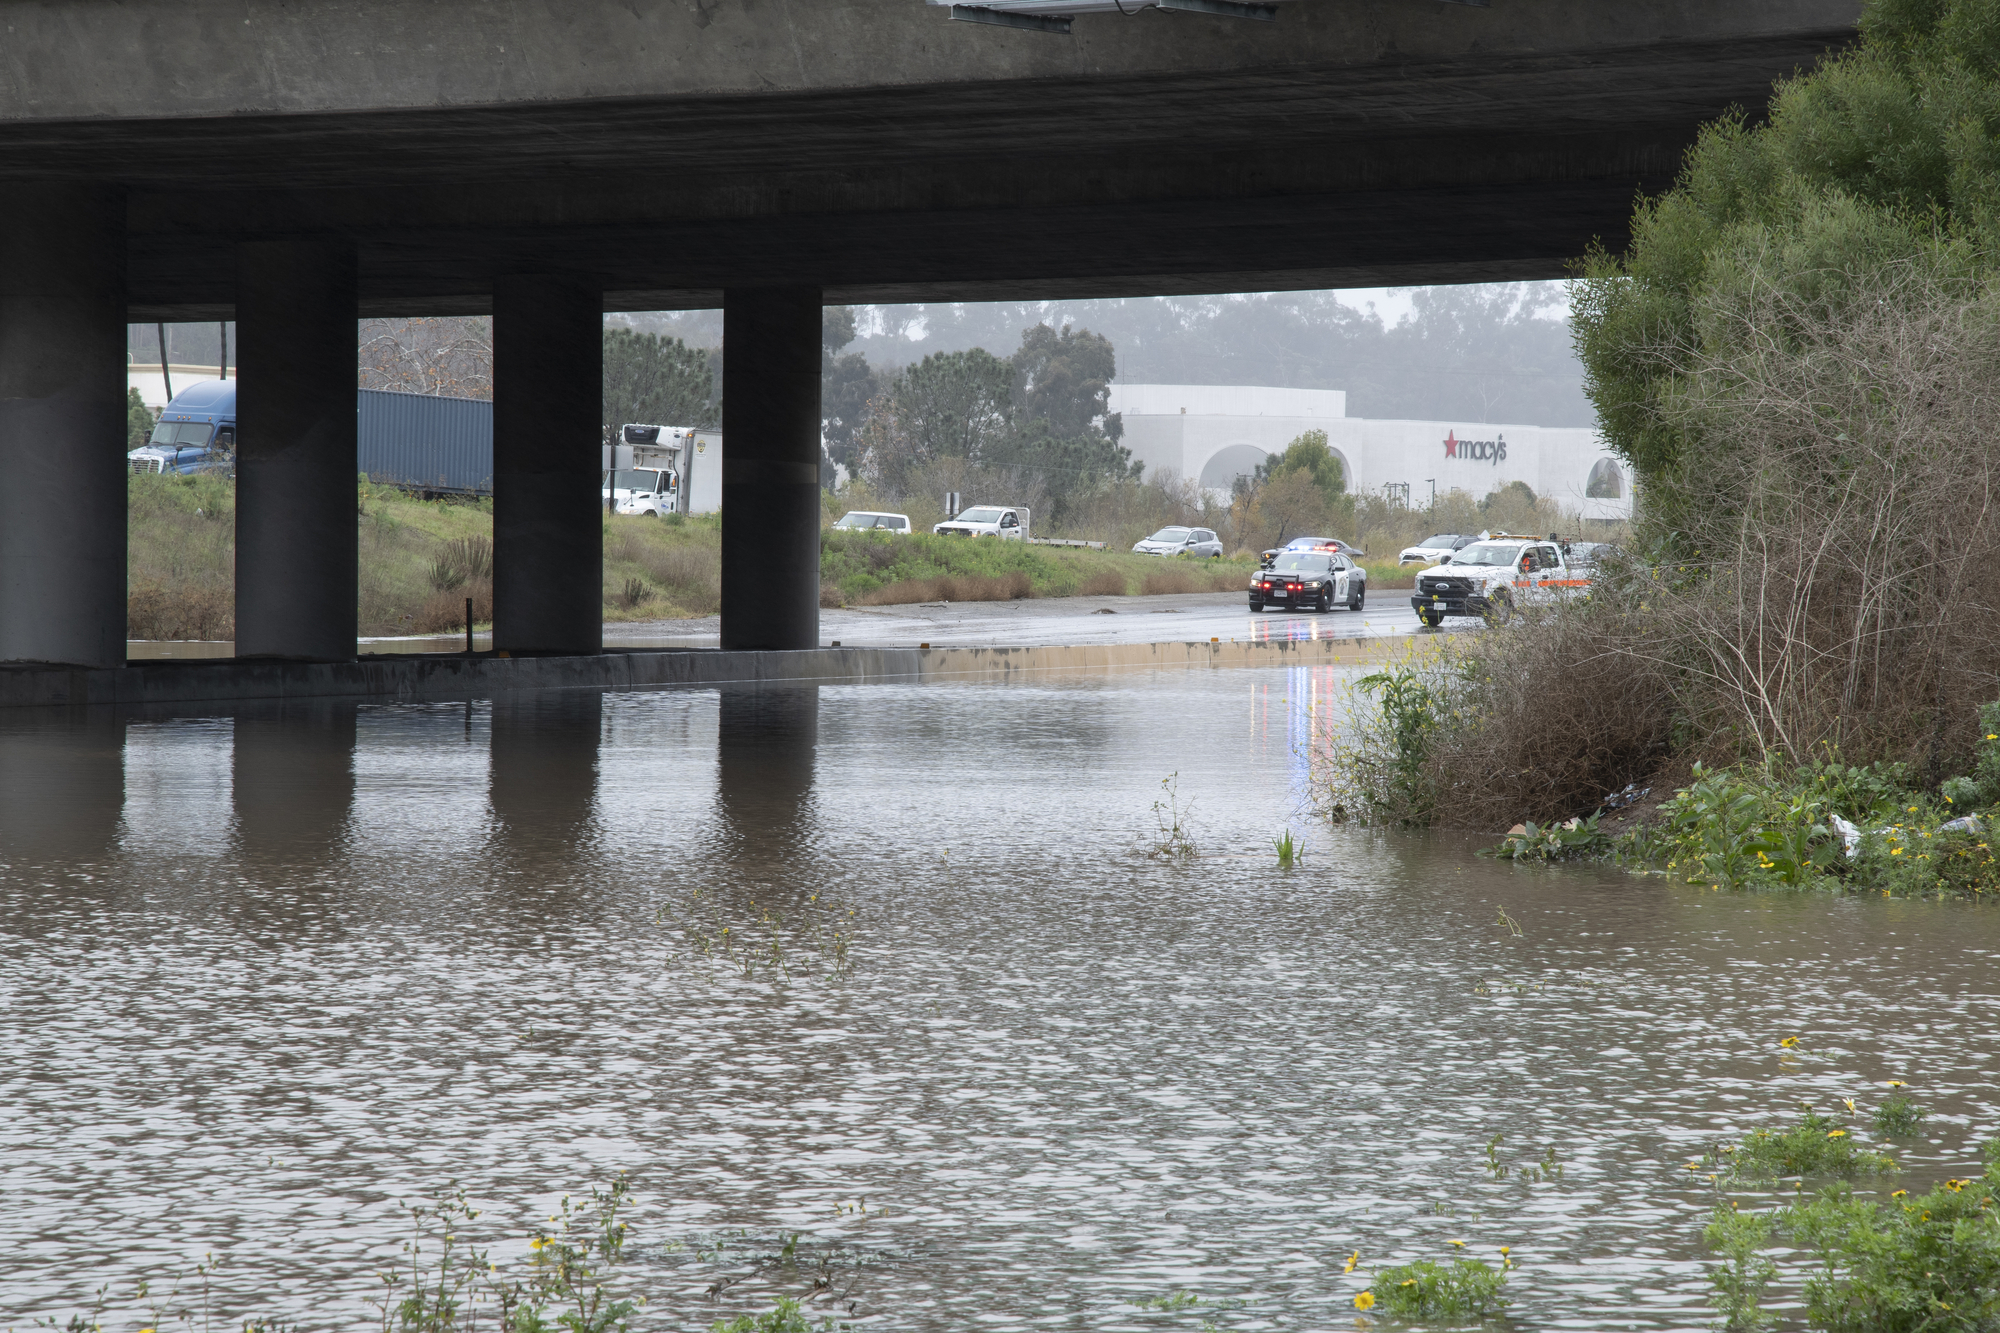 police block traffic near a freeway underpass due to  stormwater flooding - photo